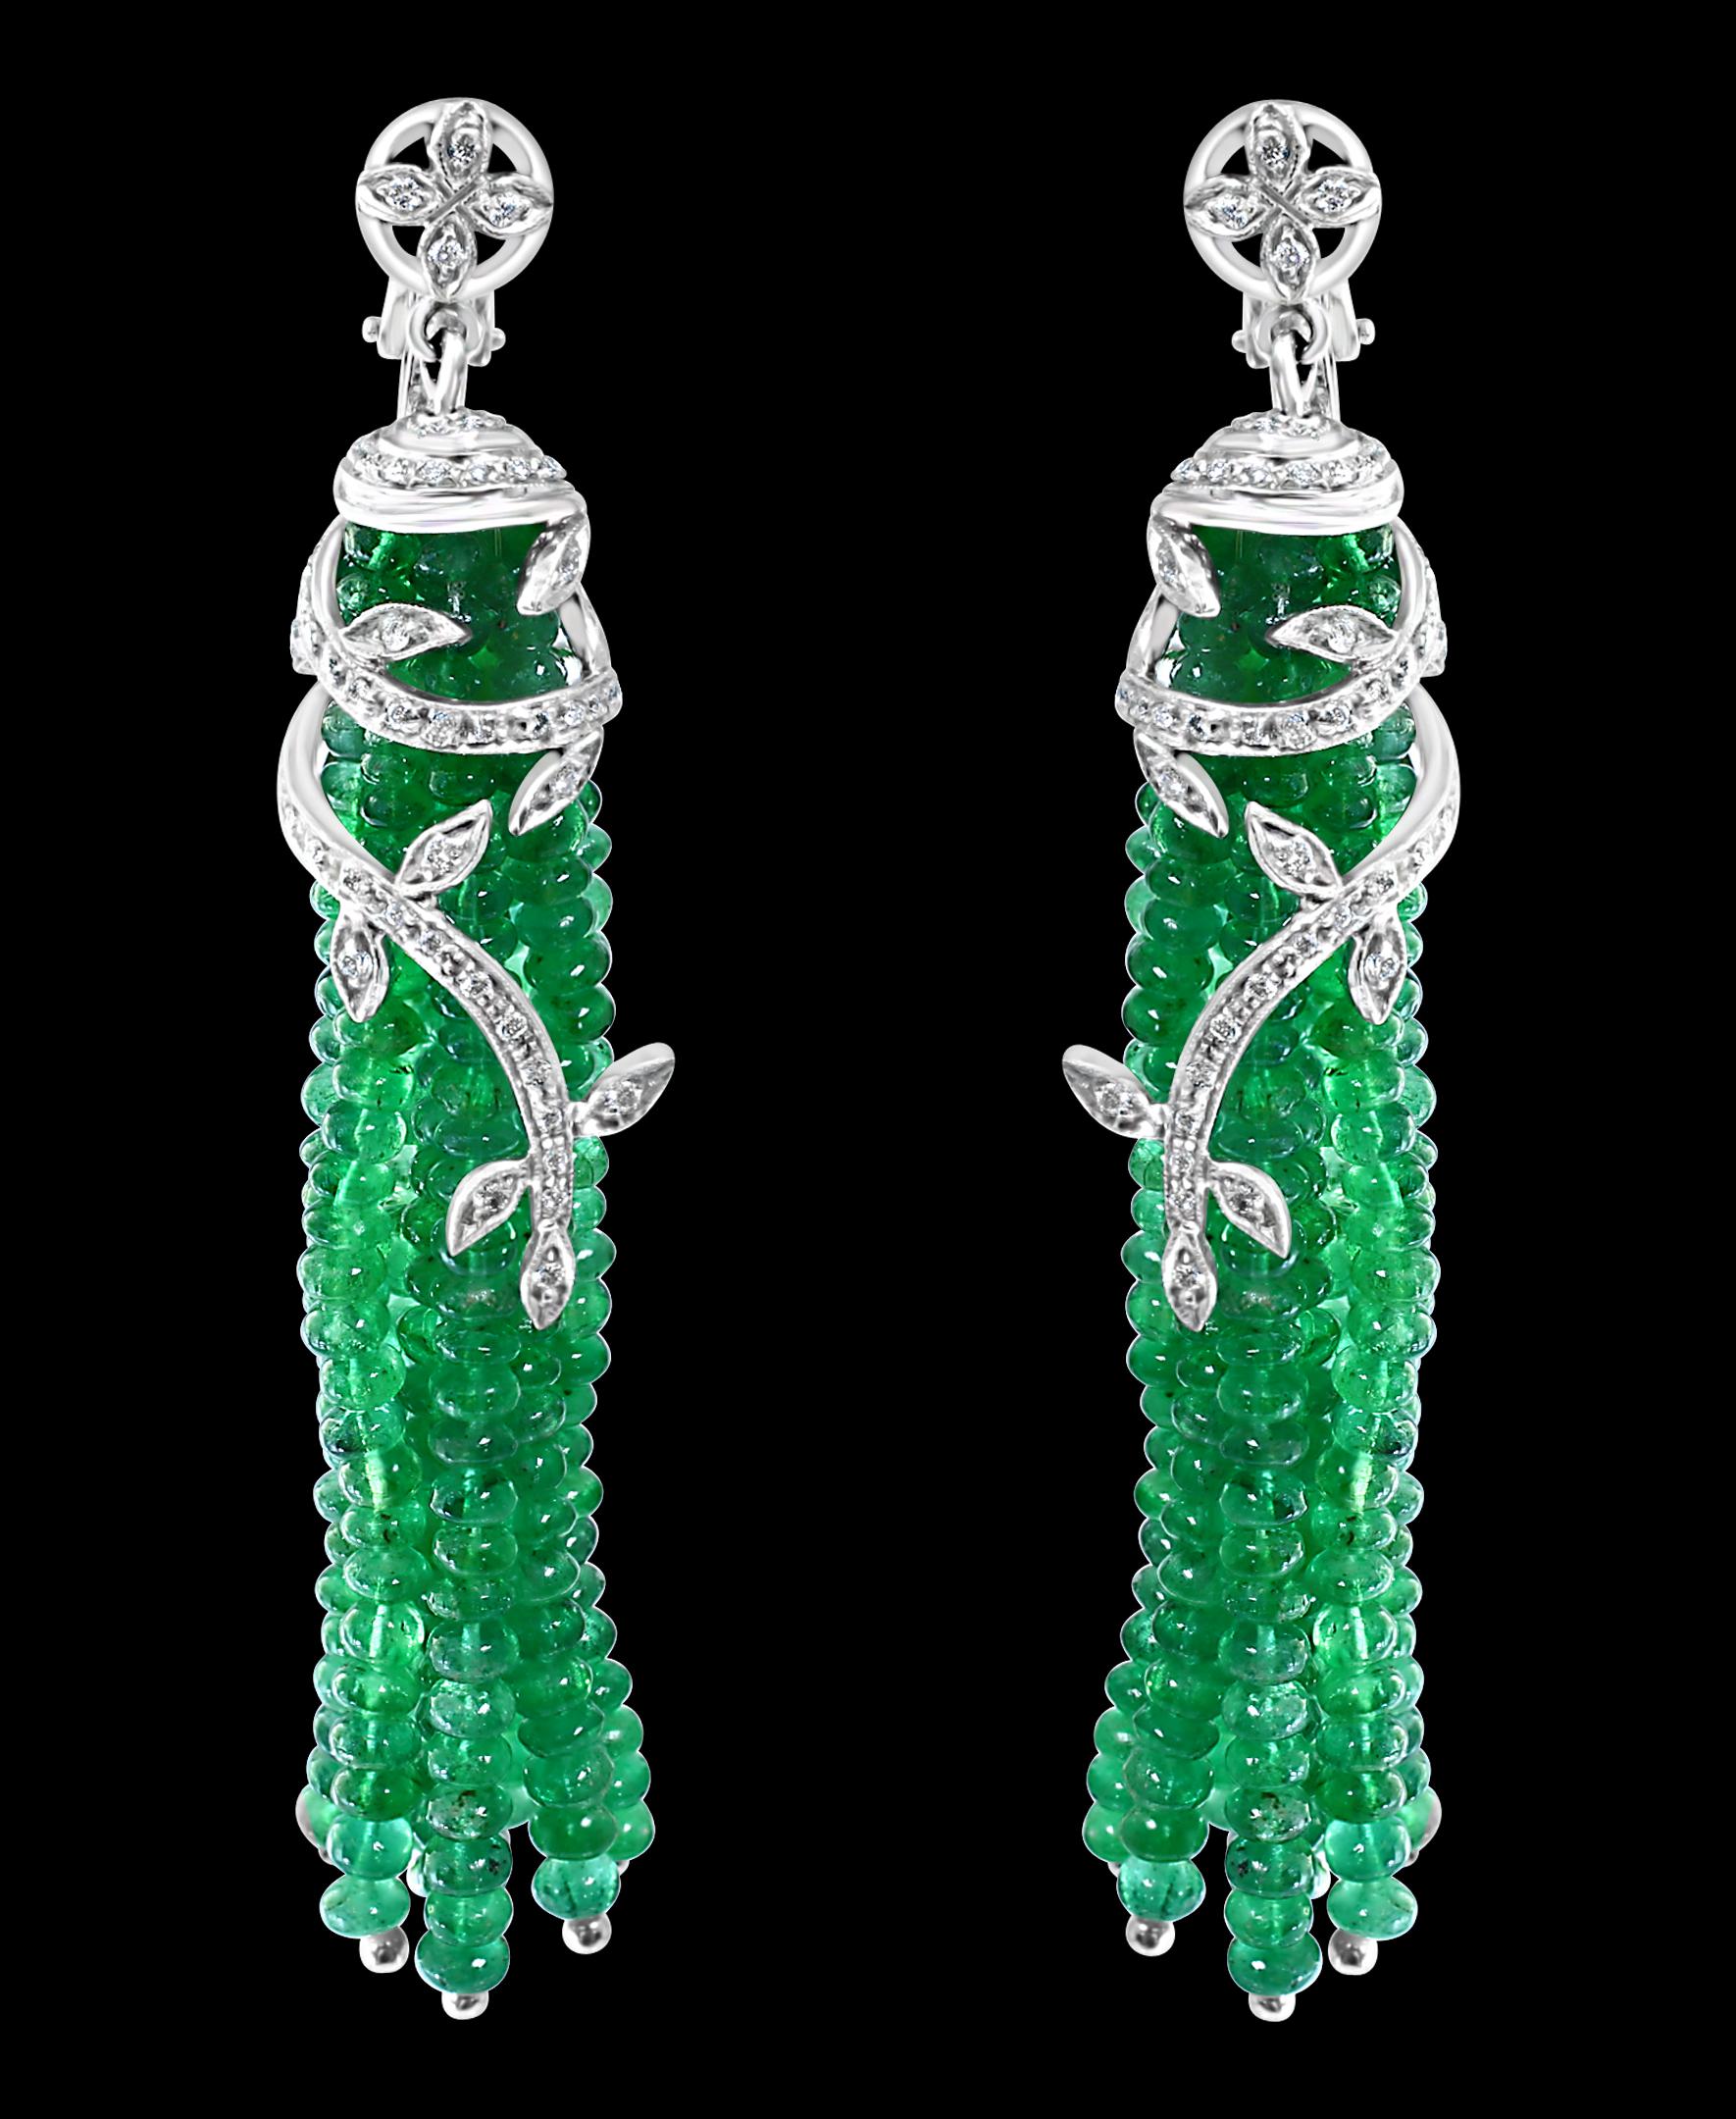 Approximately 100 Carat Natural  Emerald Beads & Diamond Hanging Earrings 18 Karat White Gold 
This exquisite pair of earrings are beautifully crafted with 18 karat White gold  
100 Carats of  fine emerald beads are  hanging  from a beautiful cap